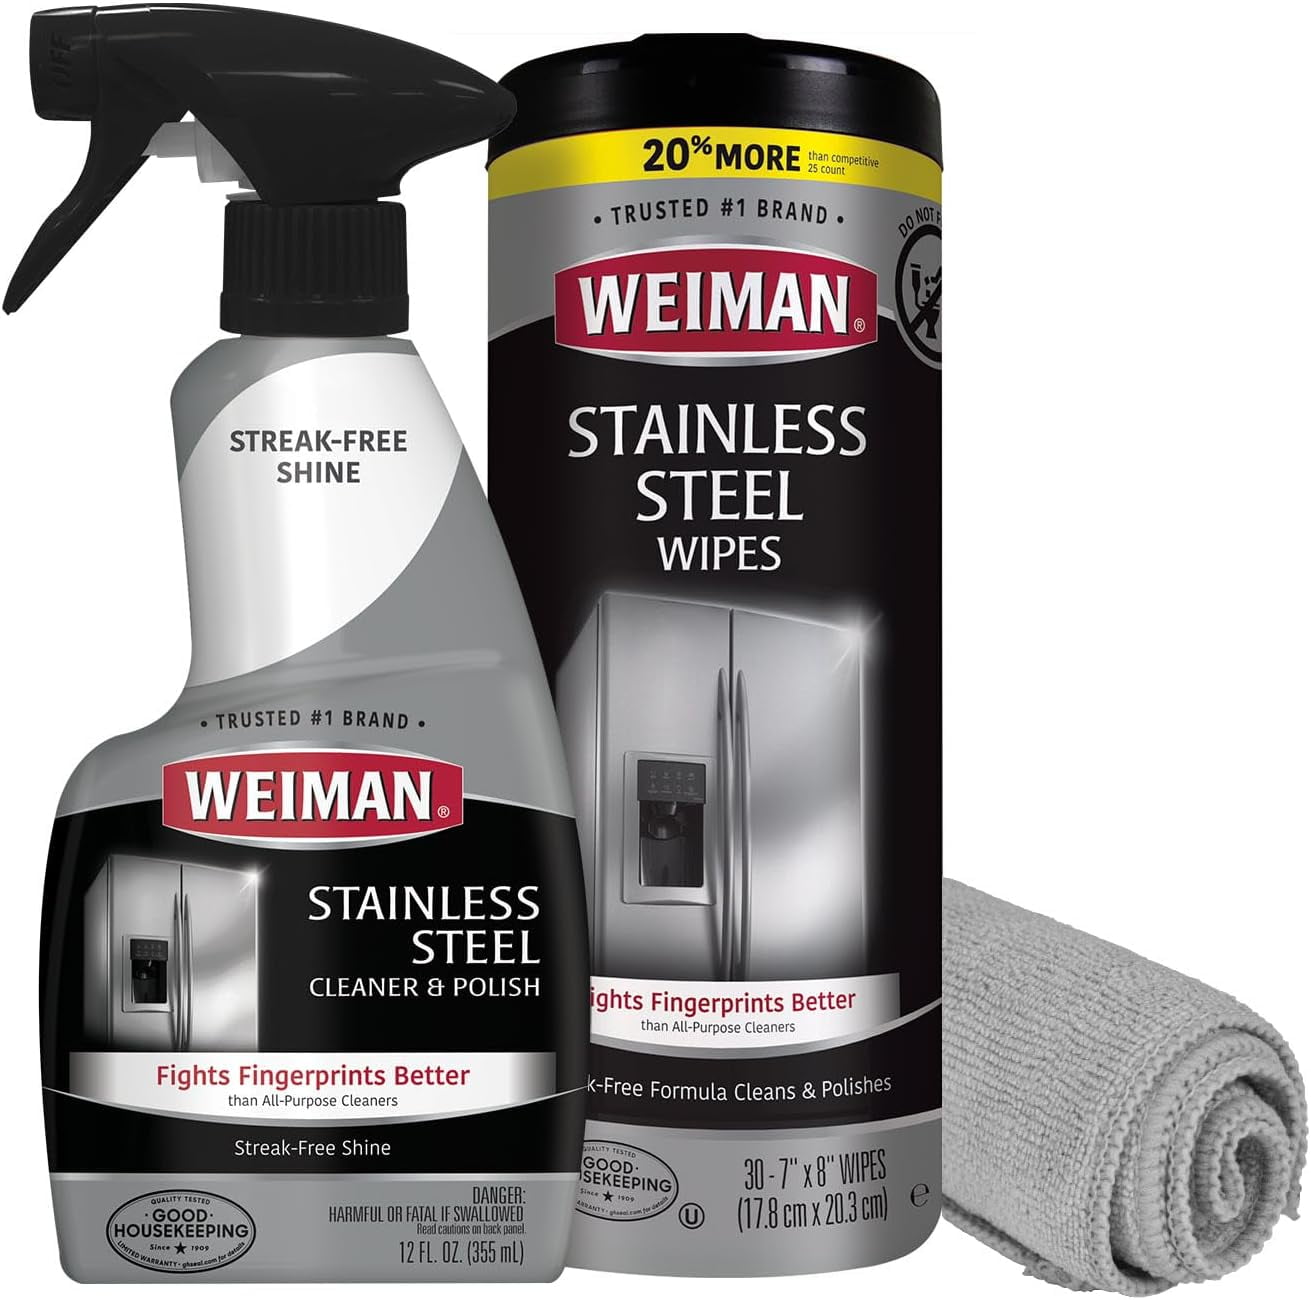  Weiman Stainless Steel Cleaner & Polish 22 fl oz - 6 pack :  Health & Household